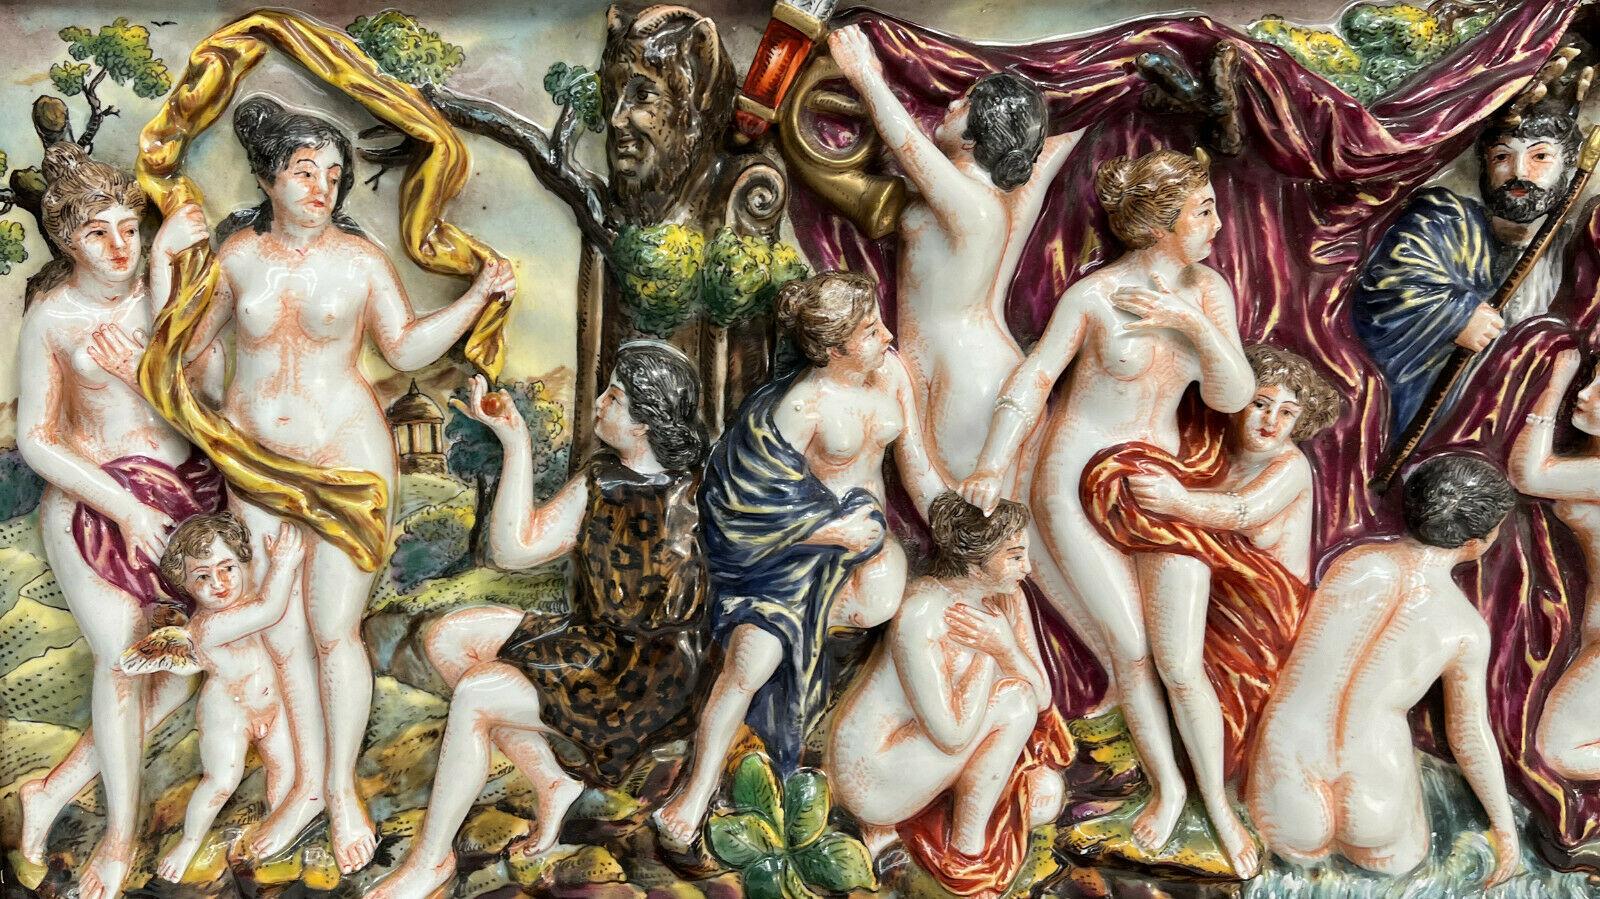 Capodimonte porcelain high relief plaque after Peter Paul Rubens, 1st Half 20th Century. After 17th Century Flemish Baroque painter, Peter Paul Rubens' Diana and Her Nymphs Surprised by Satyrs. Unmarked, but work of Capodimonte.

Additional